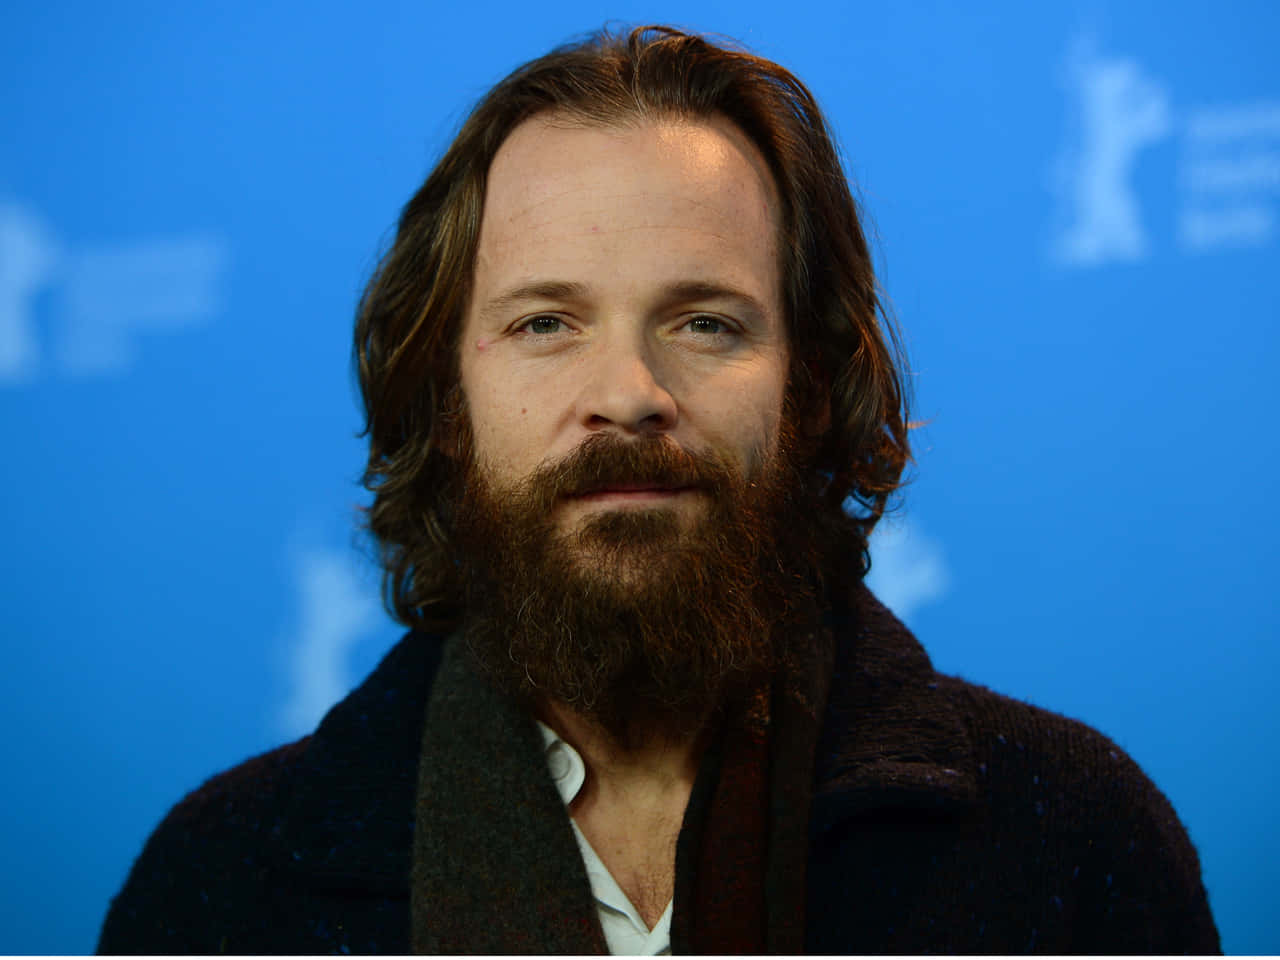 Actor Peter Sarsgaard attends the premiere of Focus Features's 'The Looming Tower'. Wallpaper